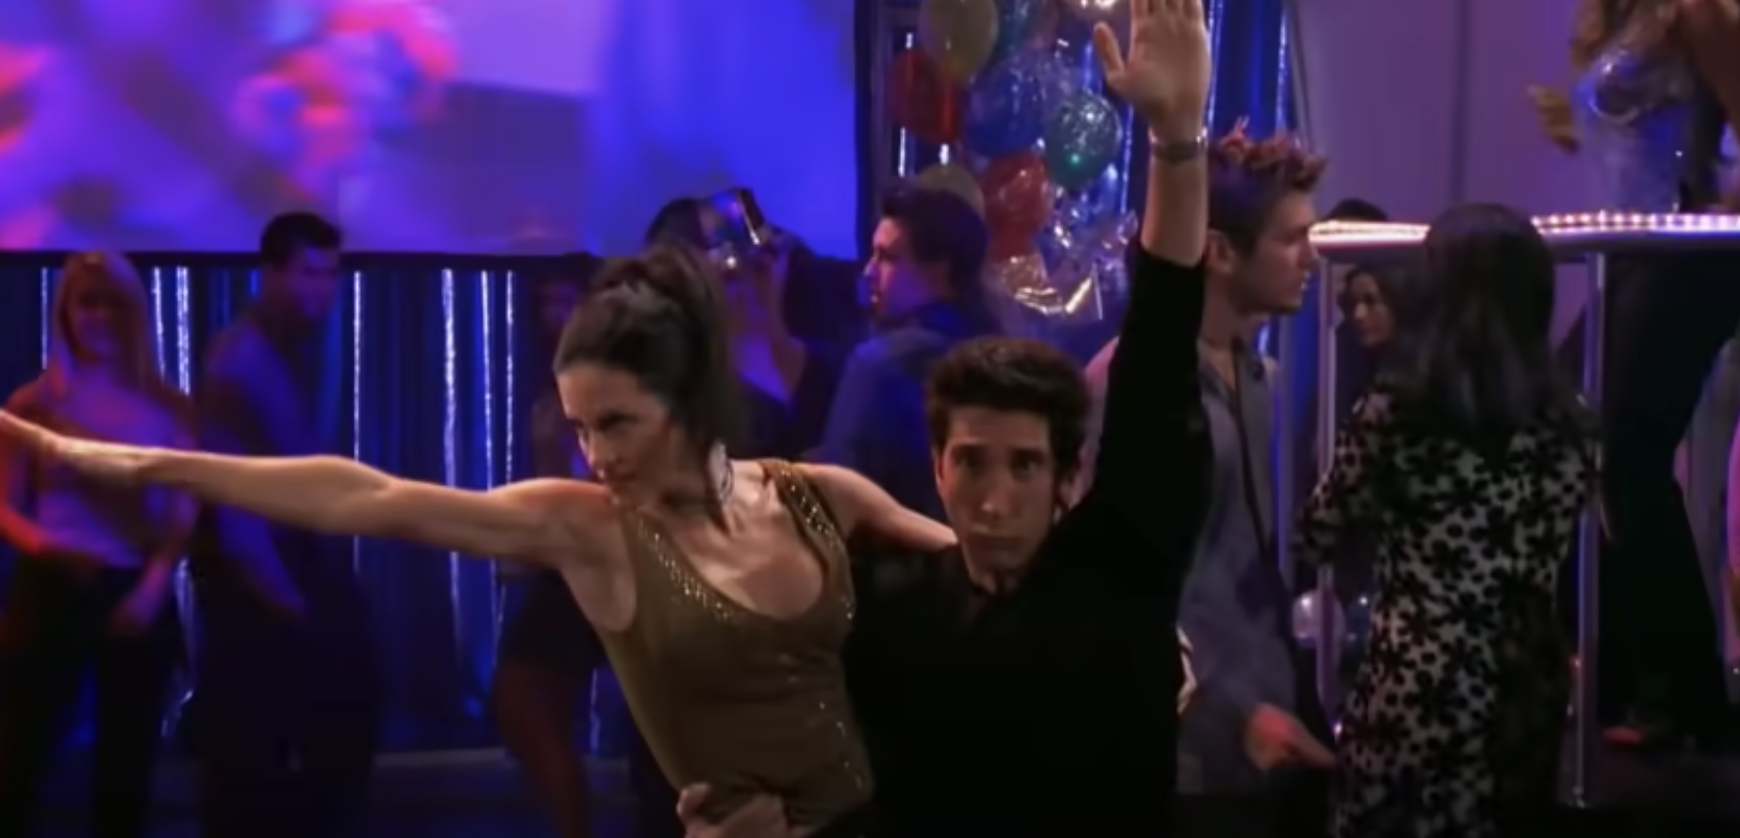 Monica and Ross are dancing on the dance floor